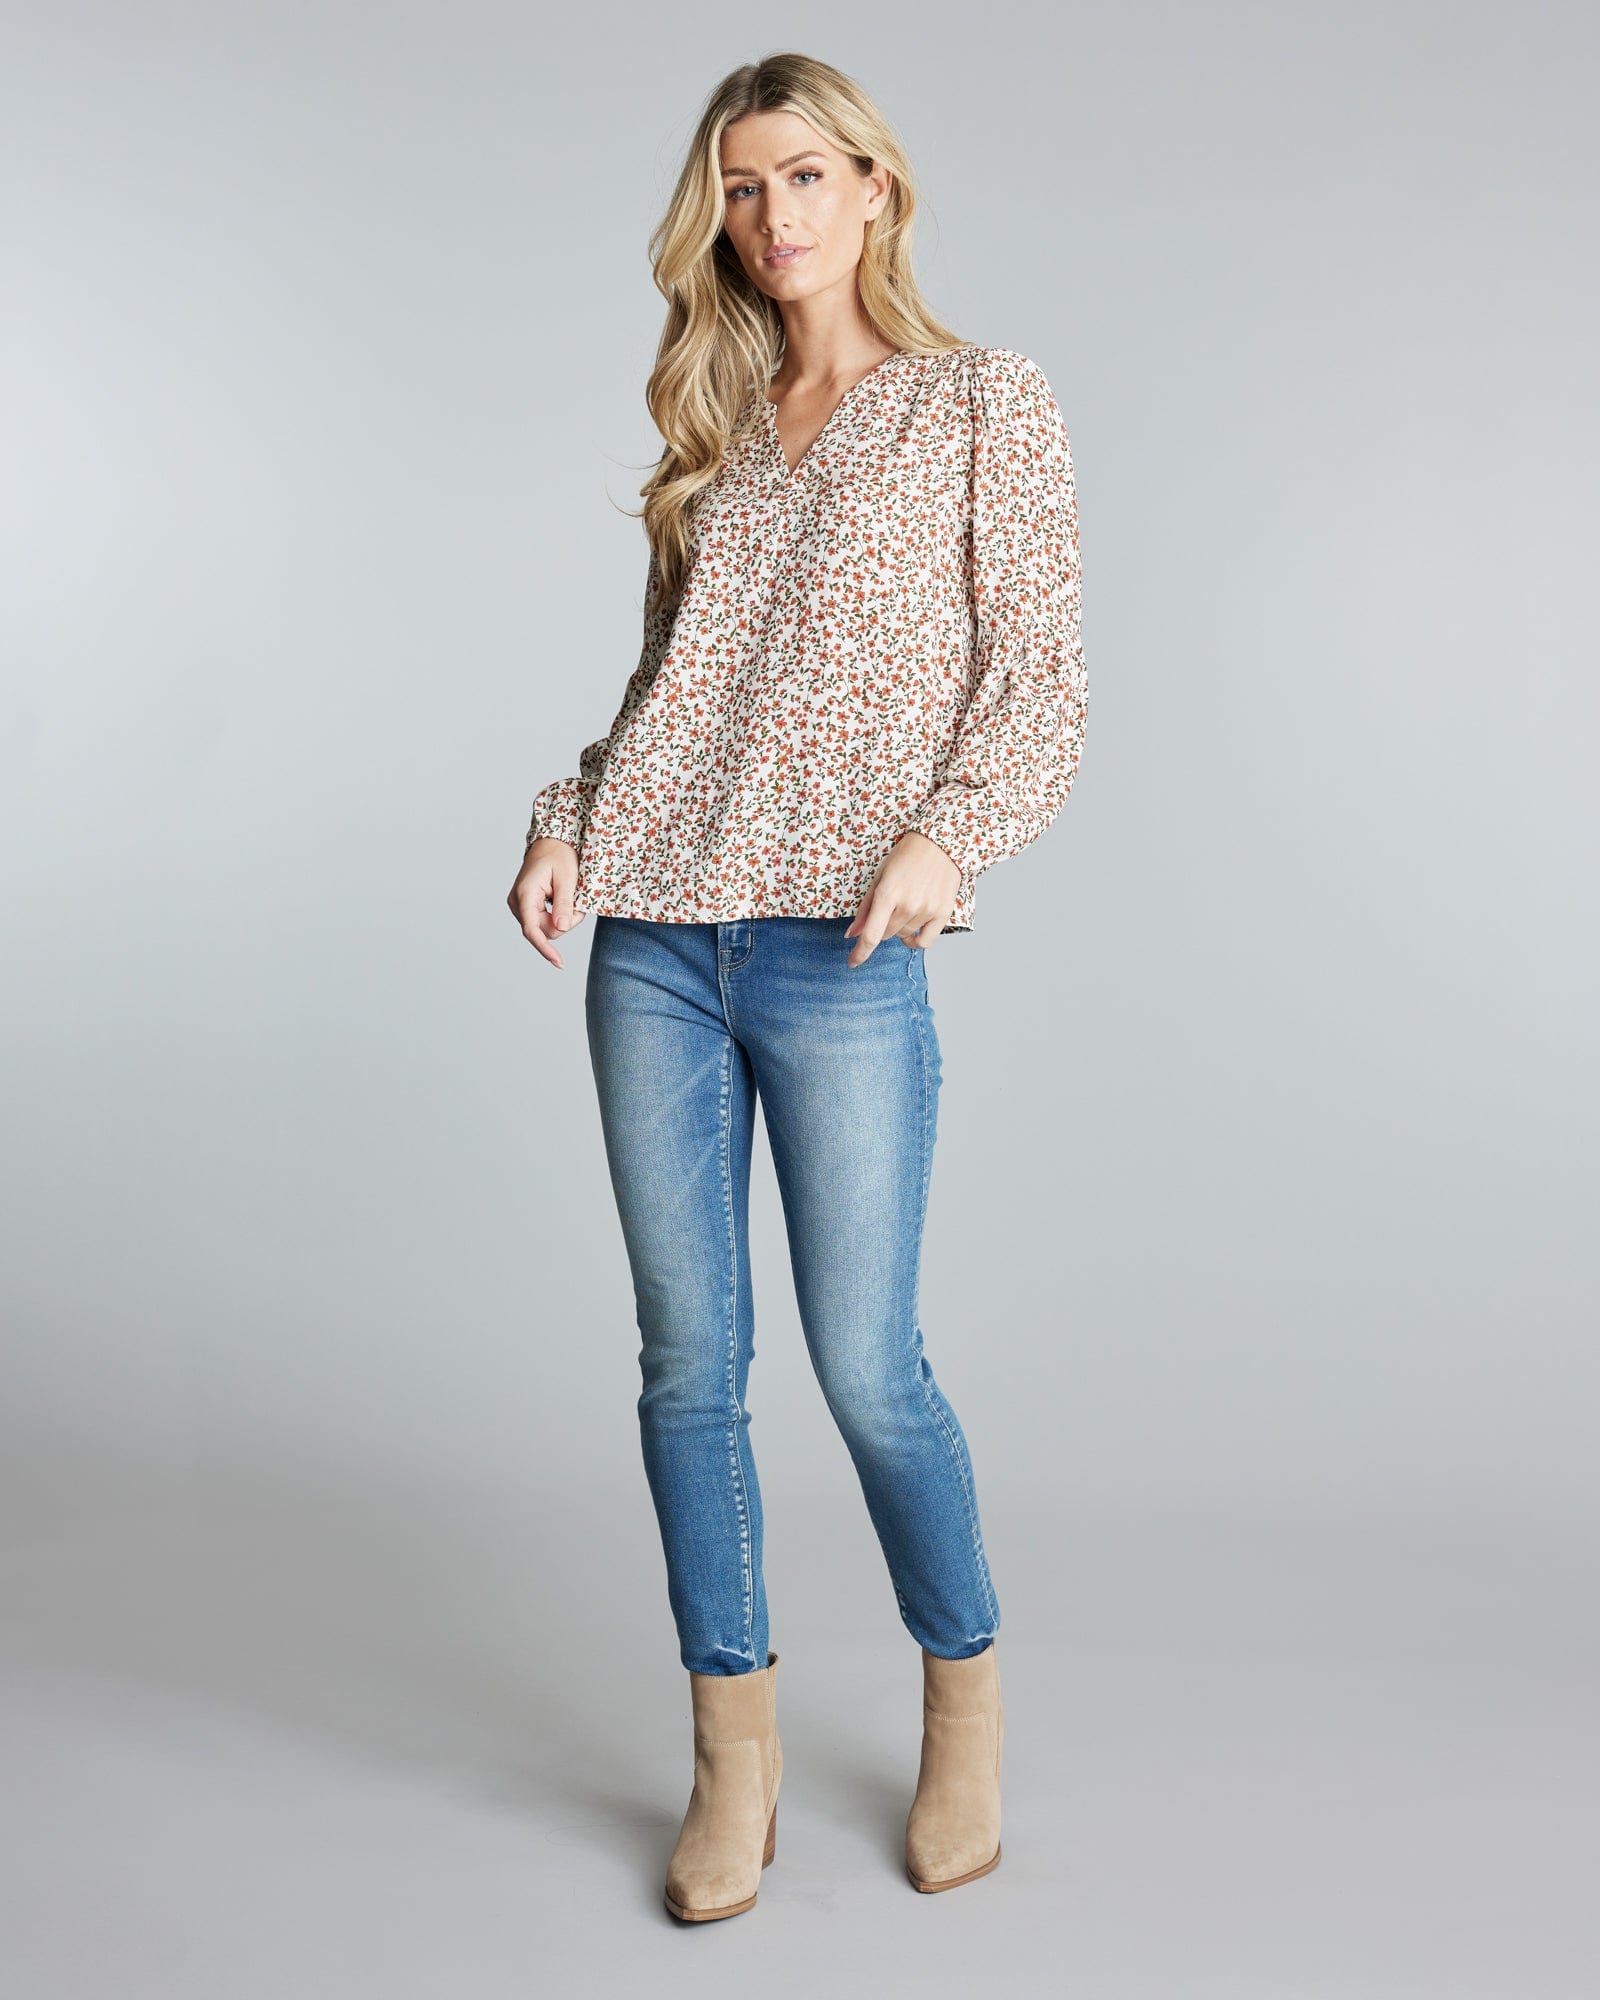 Woman in a long sleeve, floral printed blouse